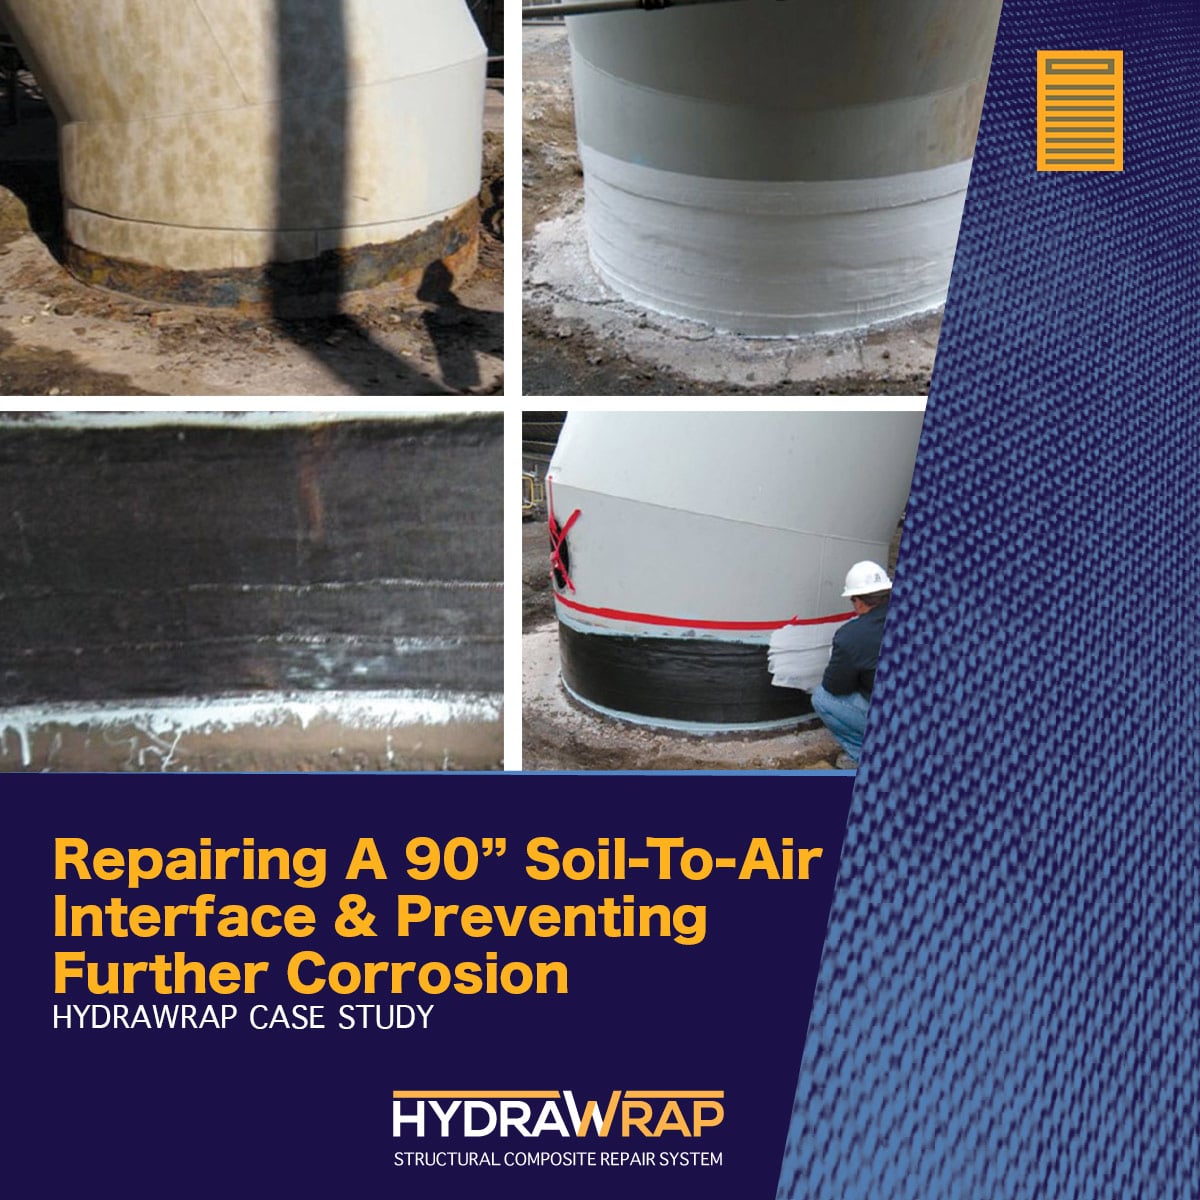 Before and after images of the soil-to-air interface repairing with HydraWrap, 'Repairing a 90" Soil-To-Air Interface & Preventing Further Corrosion'